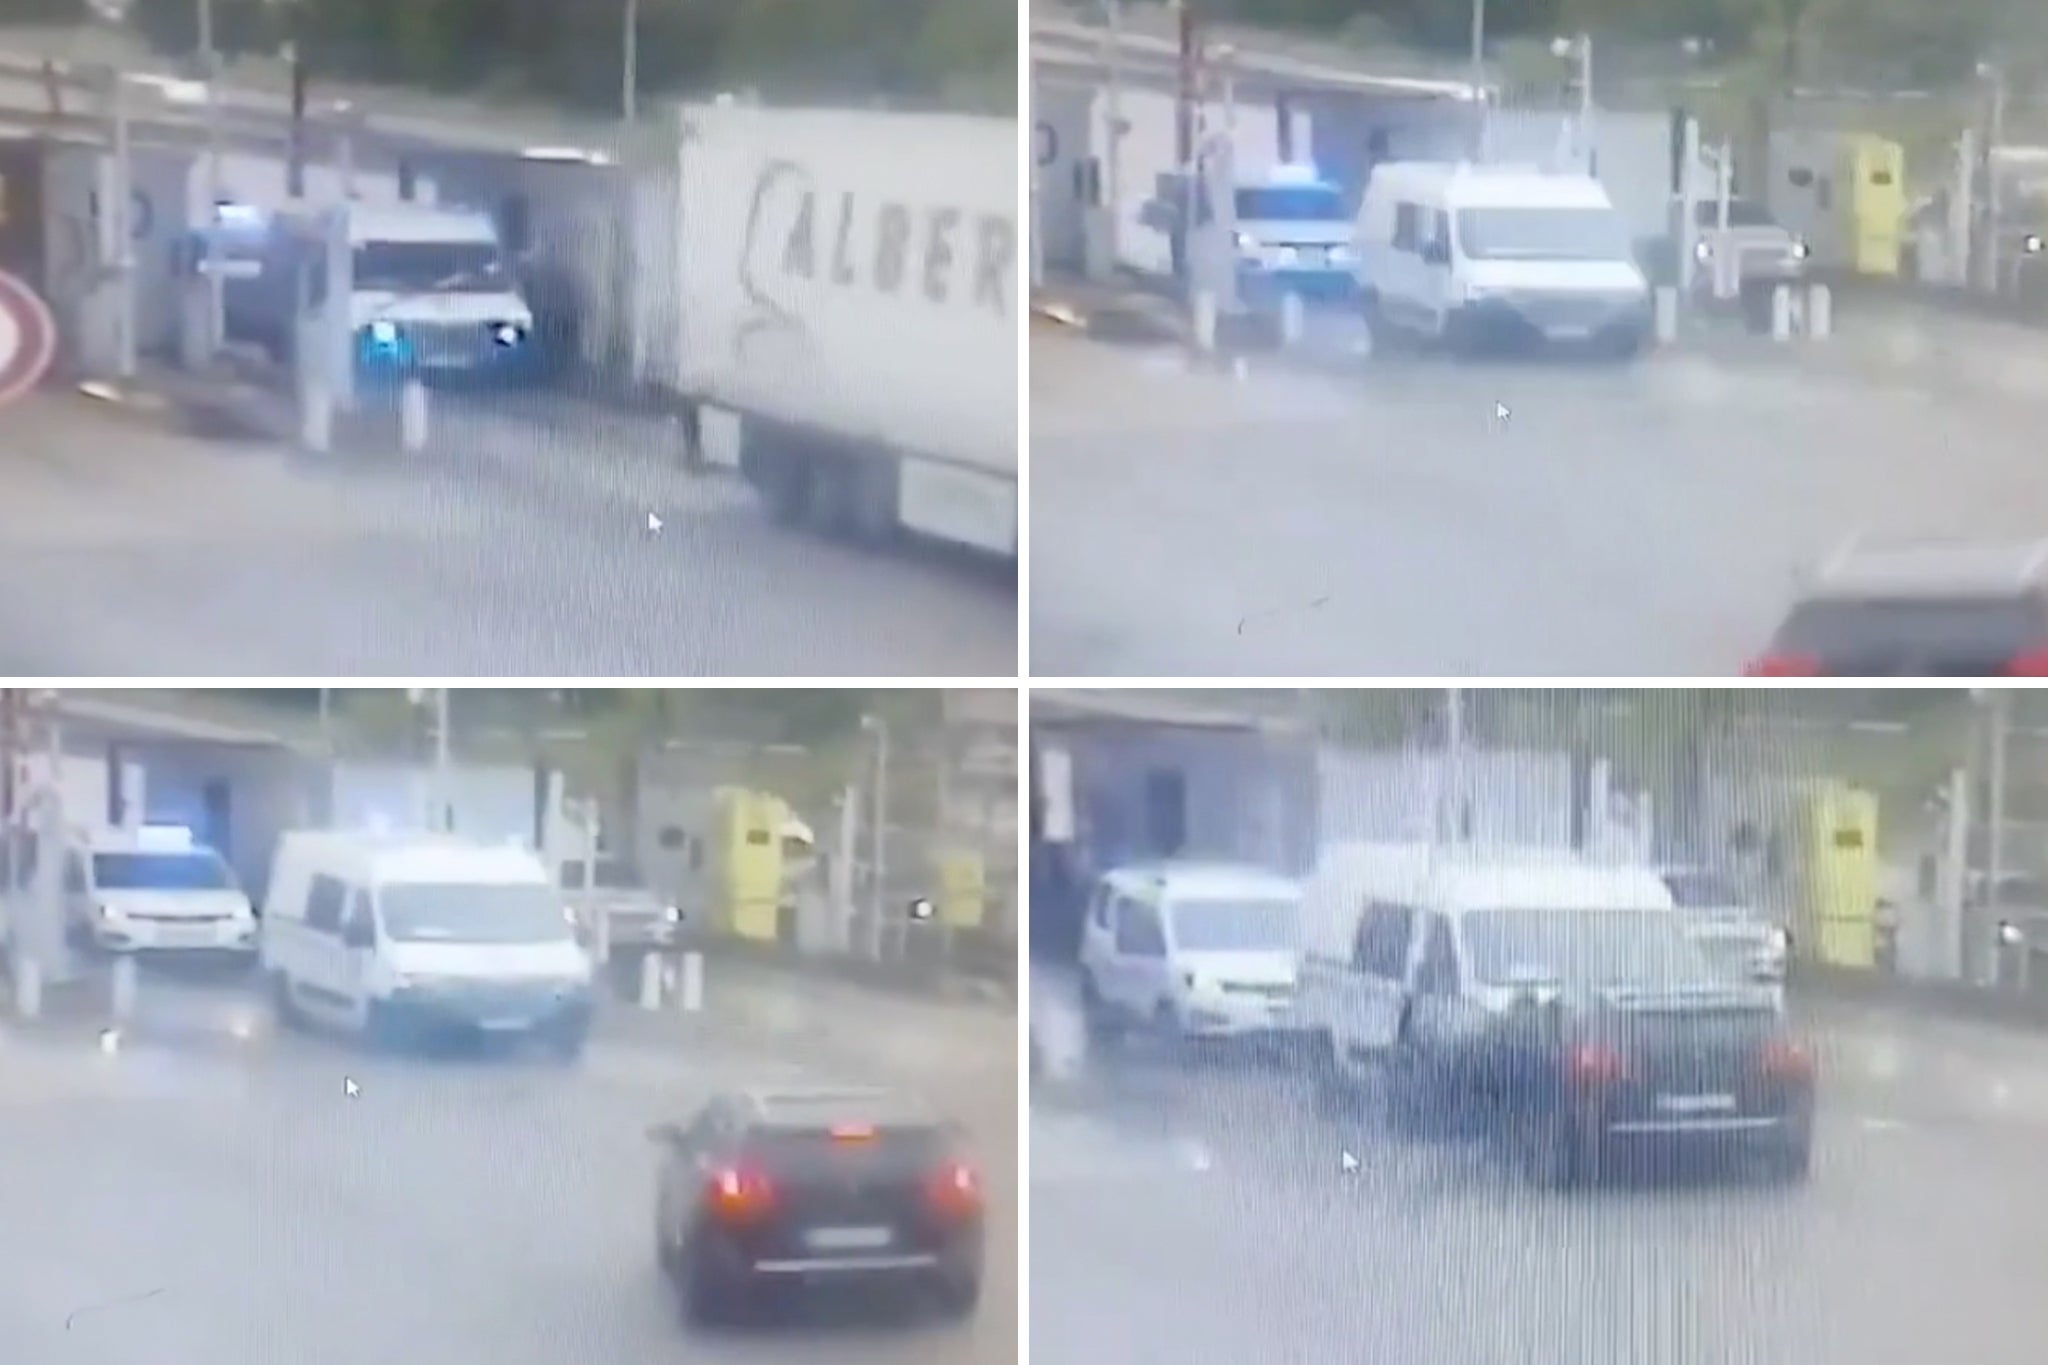 Grab from video showing moment car rammed into police van carrying the ‘Fly’ – posted by BBC